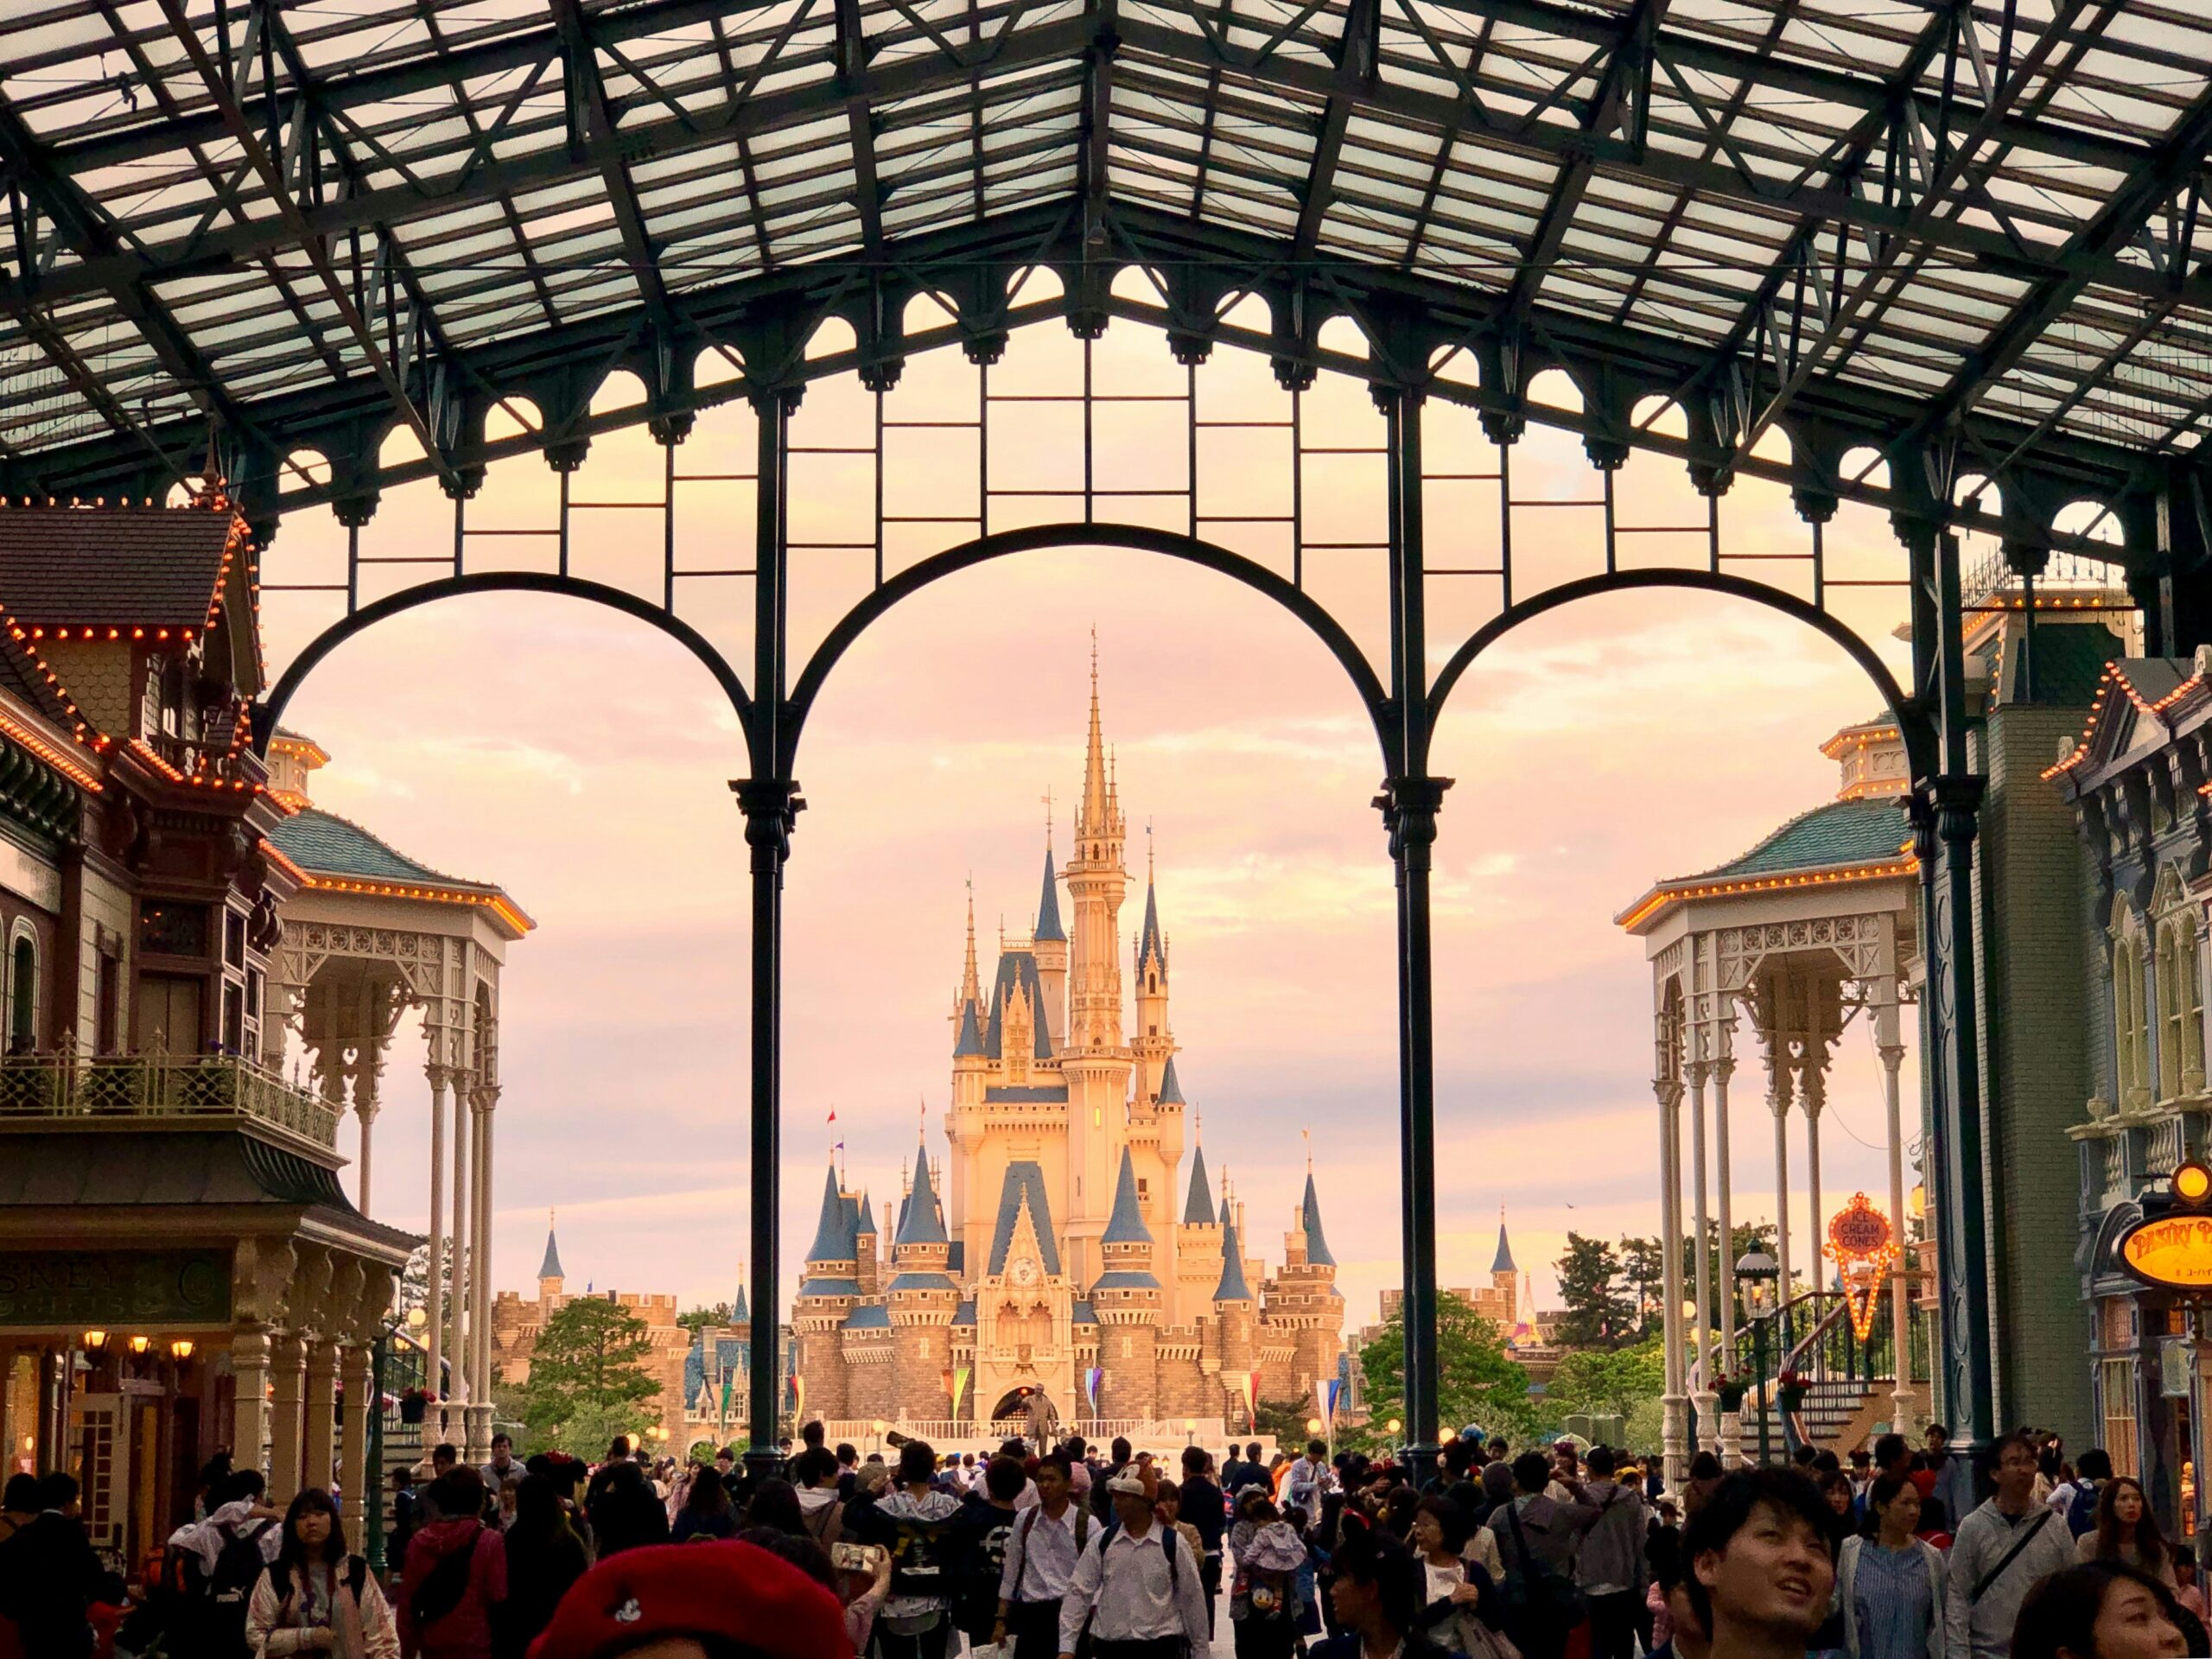 Disneyland is a very popular attraction in Japan. Check out how the park is during springtime. pictured: Disneyland Japan